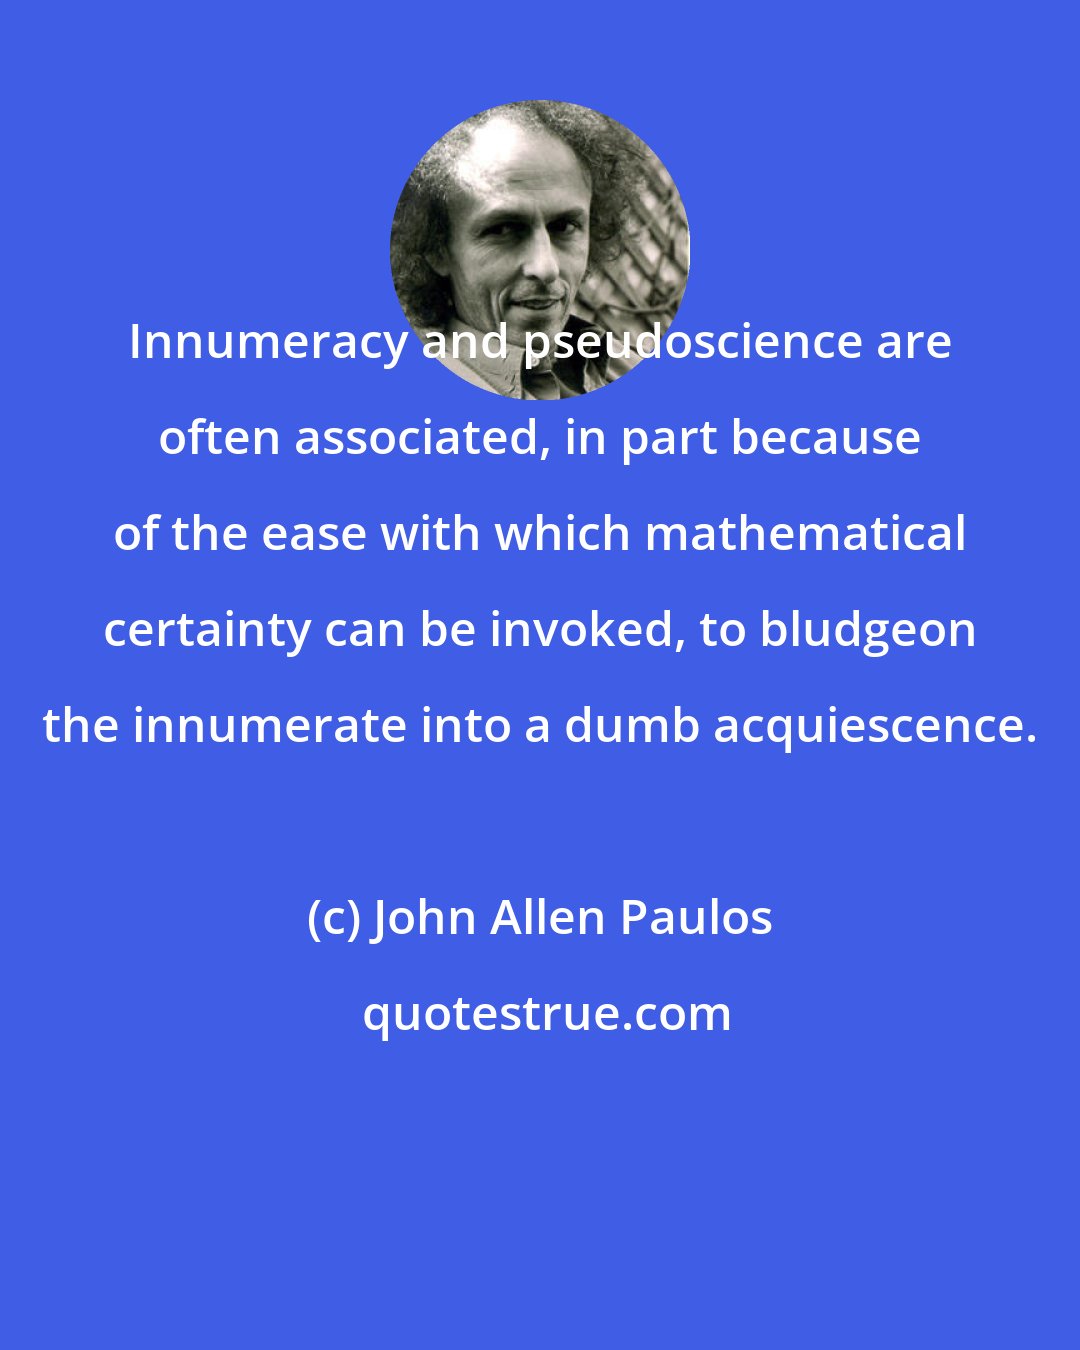 John Allen Paulos: Innumeracy and pseudoscience are often associated, in part because of the ease with which mathematical certainty can be invoked, to bludgeon the innumerate into a dumb acquiescence.